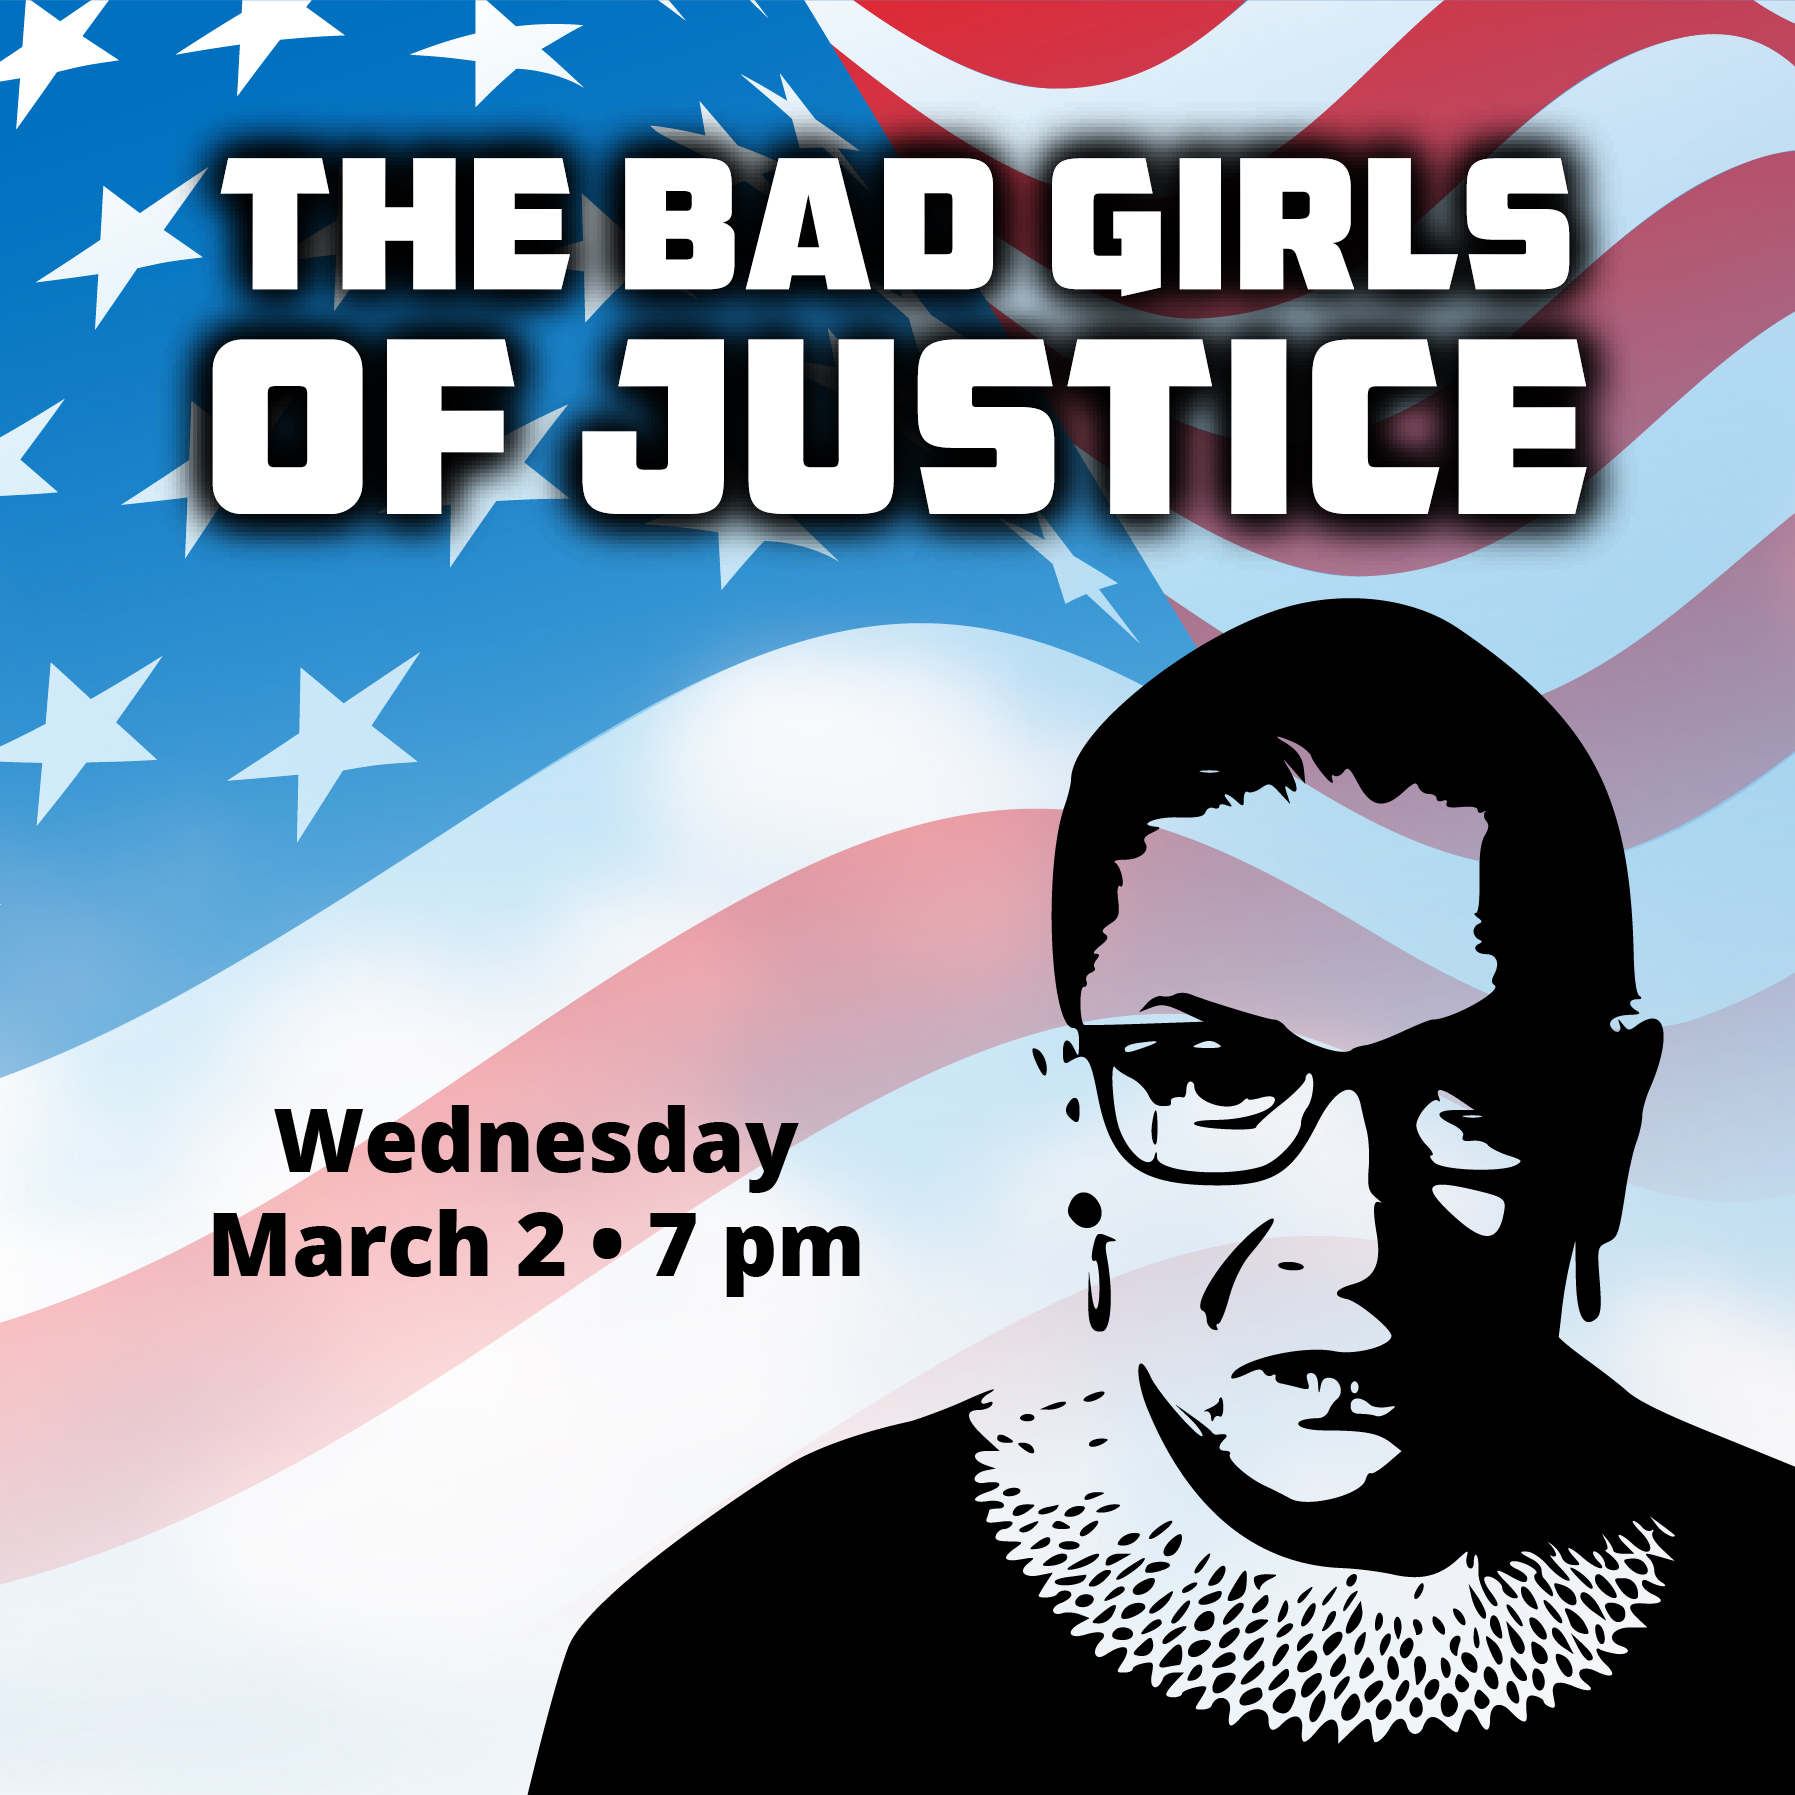 Ruth Bader Ginsberg in front of American flag with "The Bad Girls of Justice" text